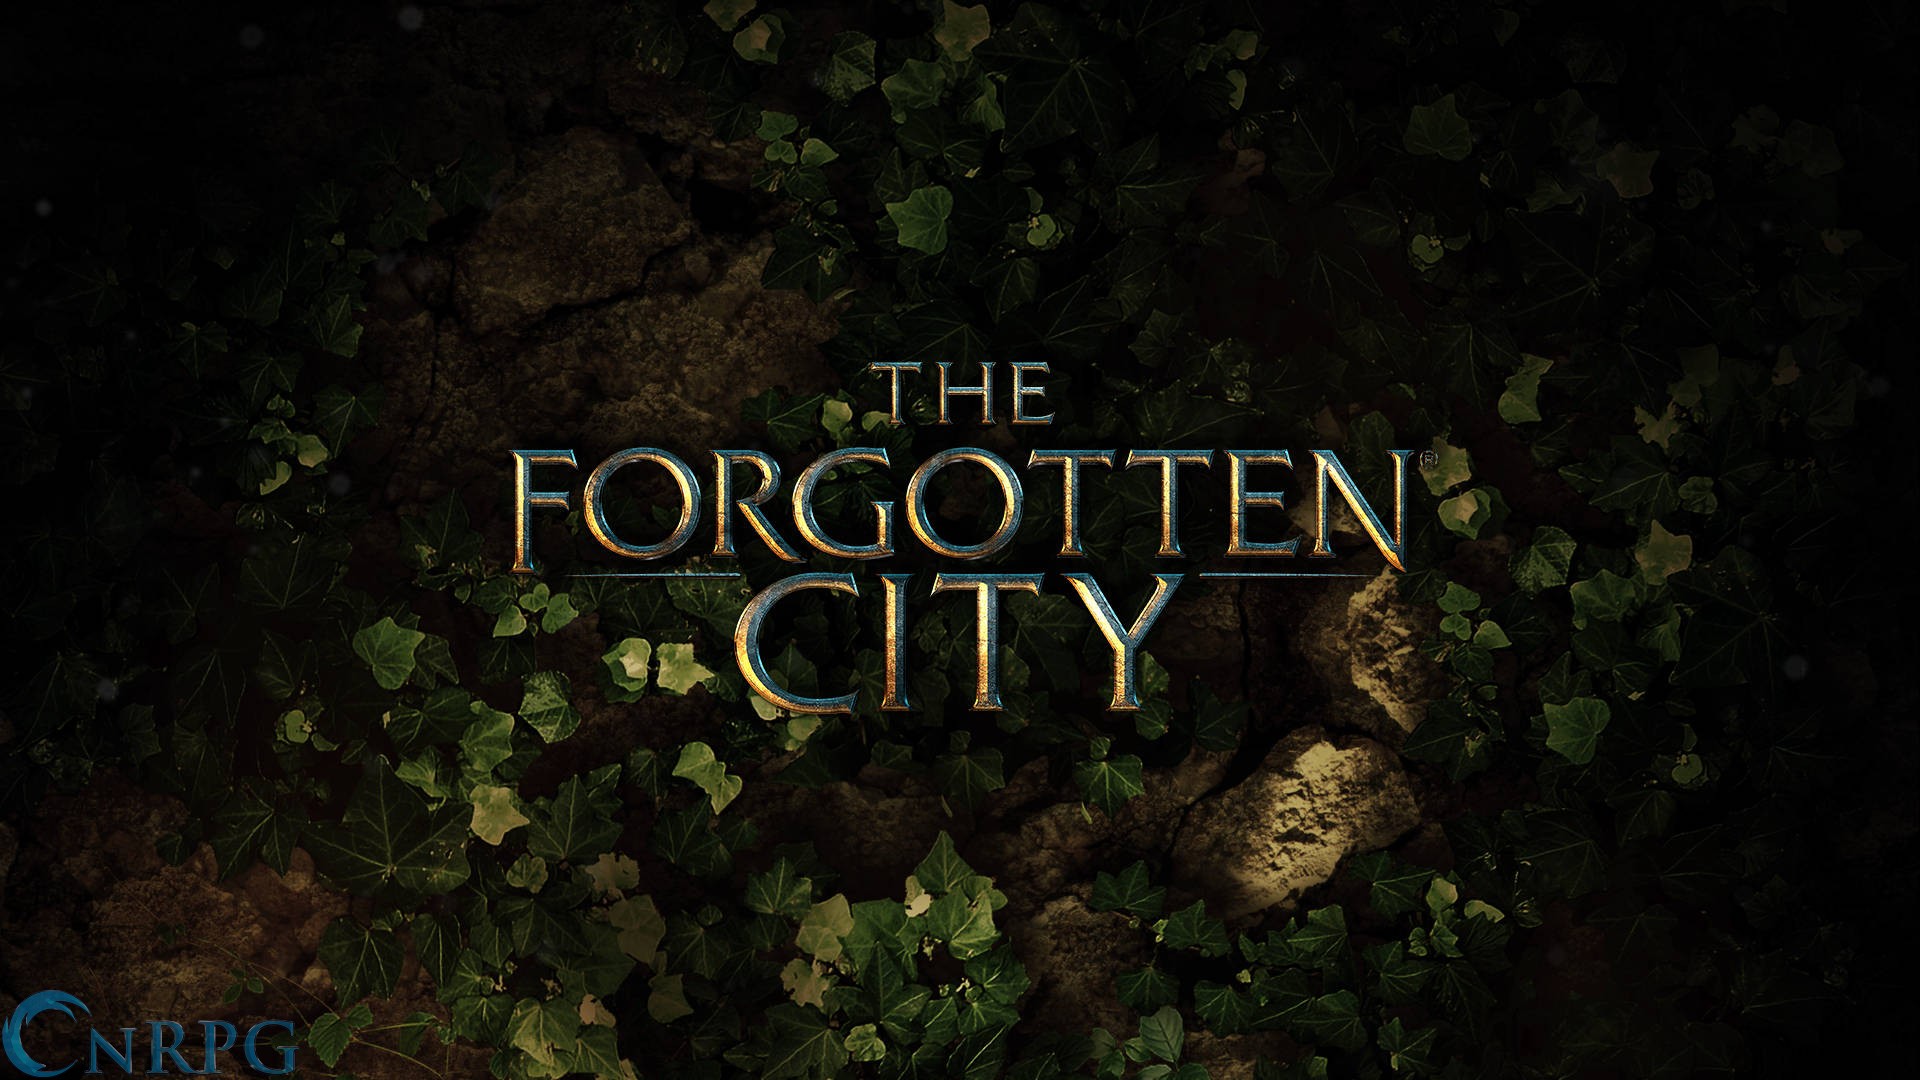 The Secret Of The Forgotten City PDF Free Download